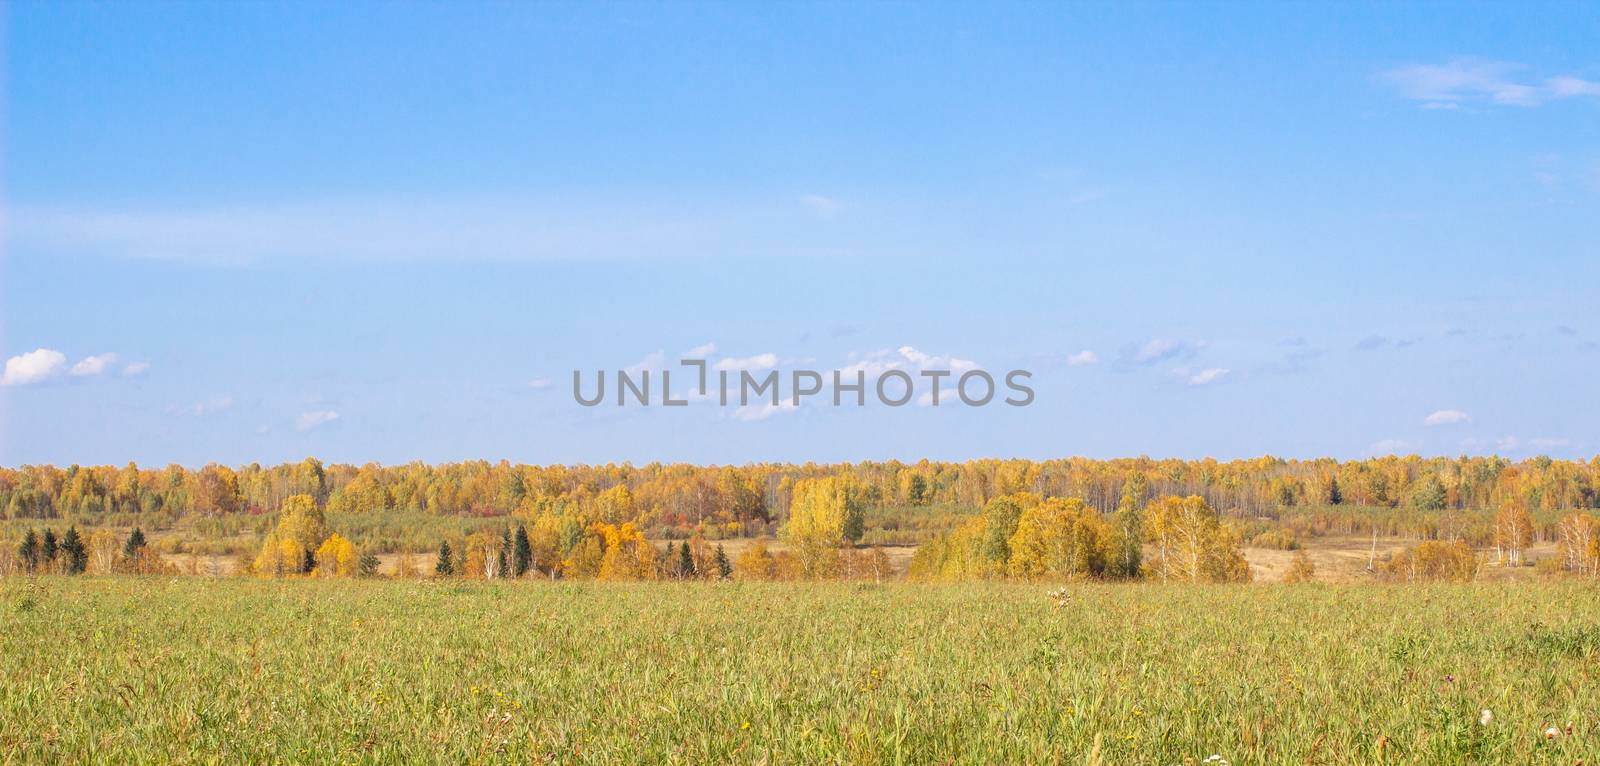 Autumn yellow forest and field. Blue sky with clouds over the forest.  by AnatoliiFoto